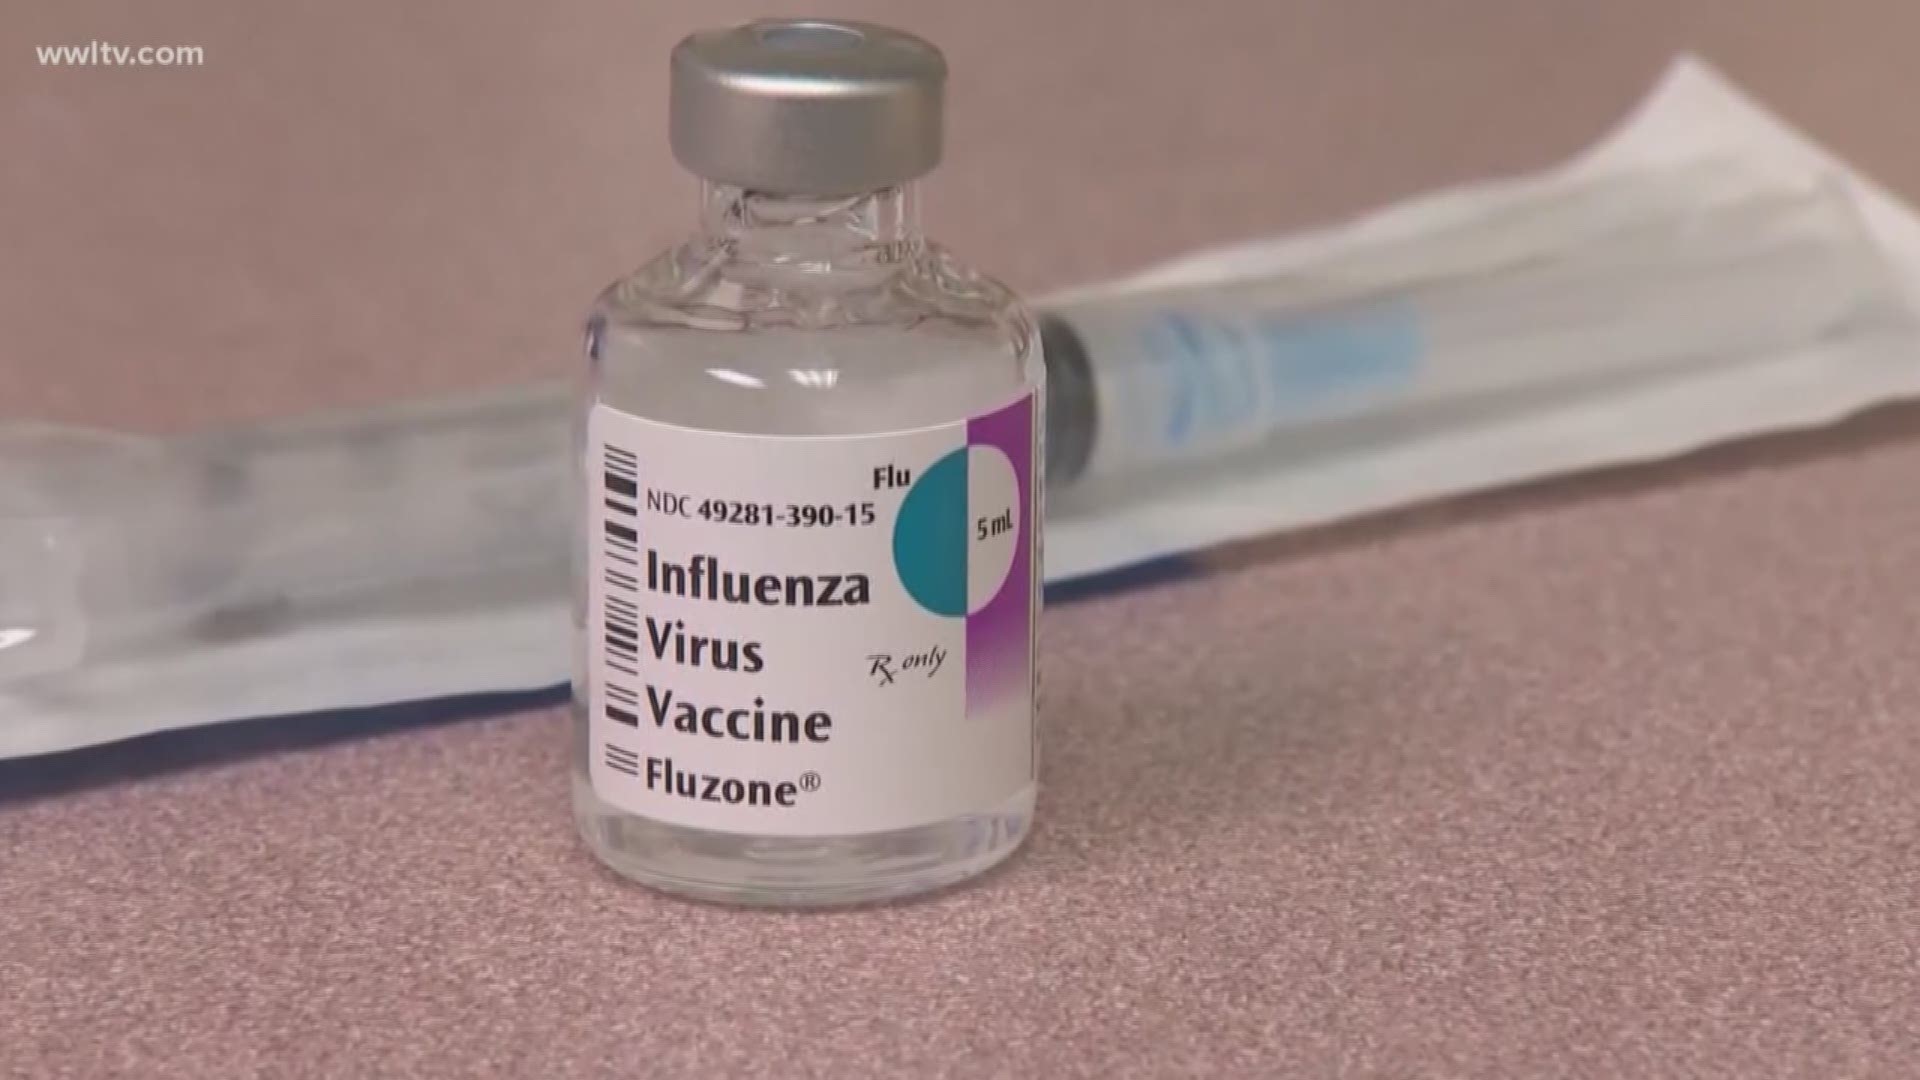 Last year's flu season was the worst in a decade. The CDC says it took the lives of 80,000 Americans. Saints owner Tom Benson was one of them. 

And while doctors can't predict how bad this season will be, they do say the time is now to get your vaccine.